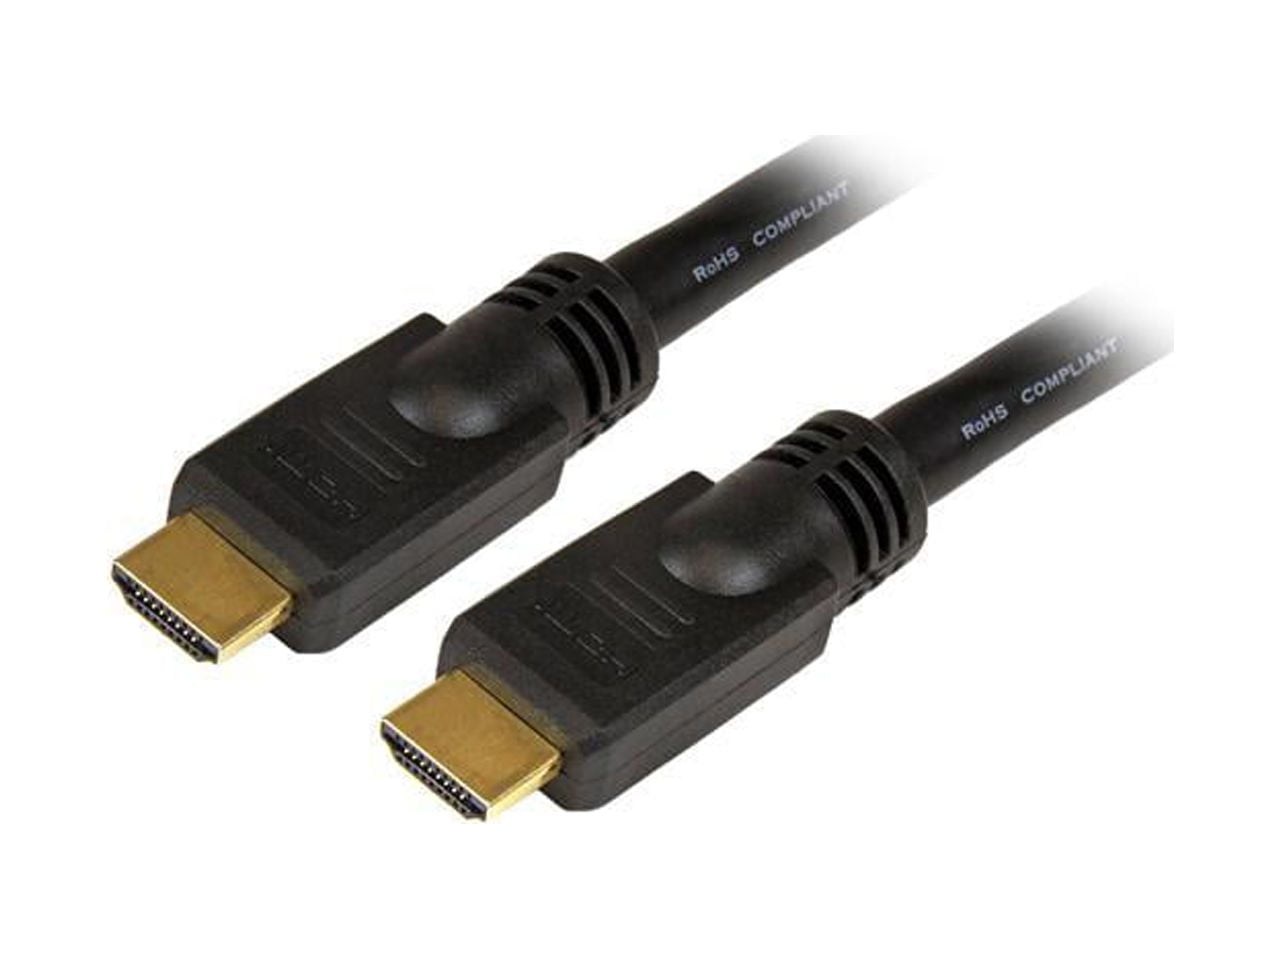   Basics HDMI A to DVI Adapter Cable, Bi-Directional  1080p, Gold Plated, Black, 6 Feet, 1-Pack For Television : Electronics